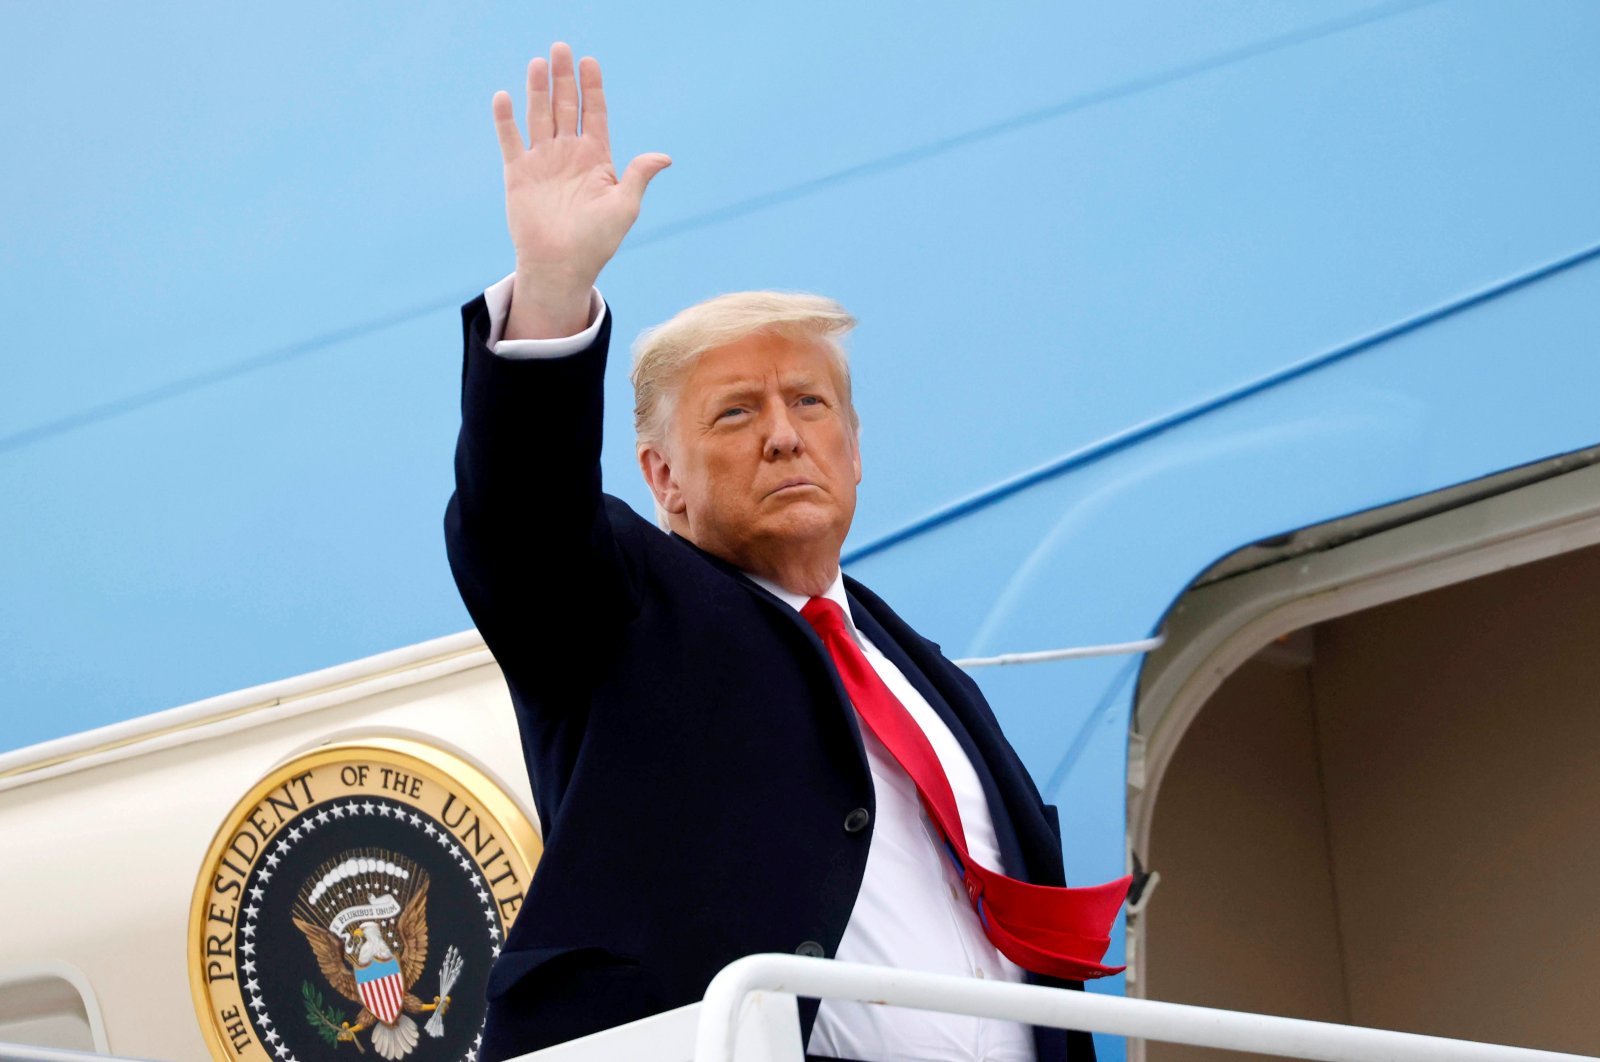 U.S. President Donald Trump salutes as he boards Air Force One at Valley International Airport after visiting the U.S.-Mexico border wall, in Harlingen, Texas, U.S., Jan. 12, 2021. (Reuters Photo)